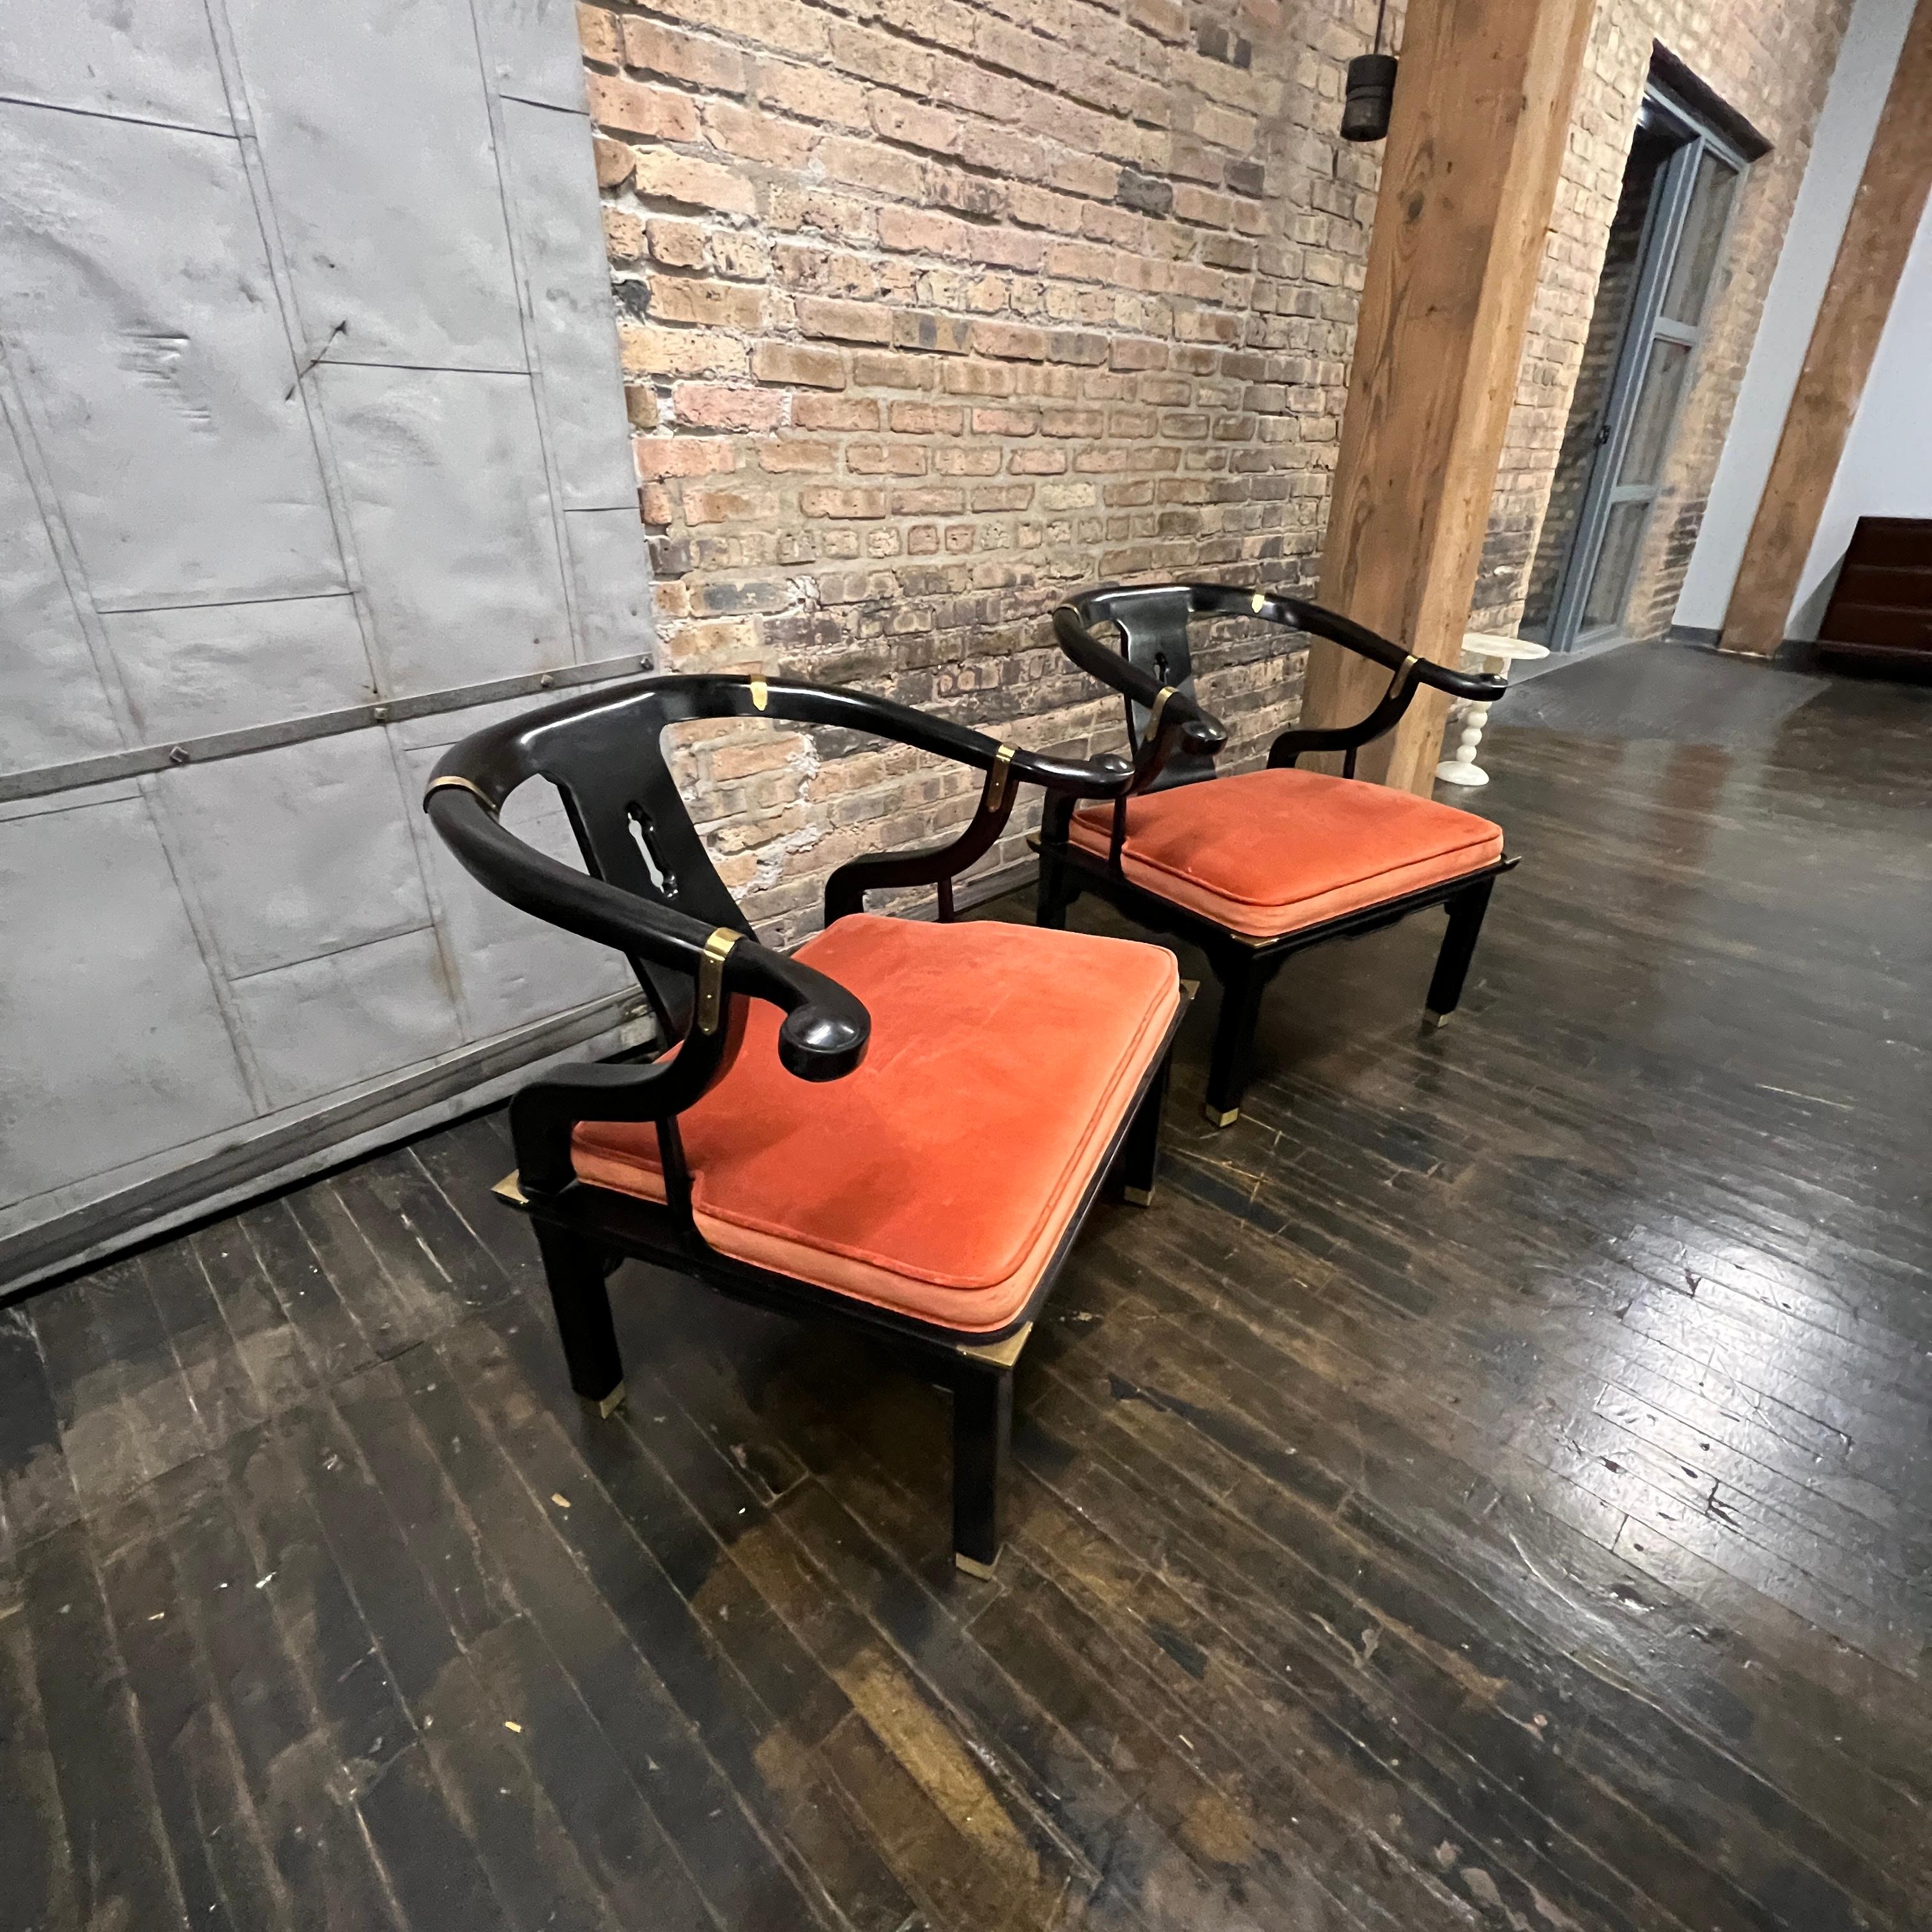 A lovely pair of large Chinese ming style horseshoe lounge chairs made by Century Furniture. Originally designed by James Mont these chairs epitomize his over the top dramatic mid-century modern style with a unique Asian flare. Hardwood frames